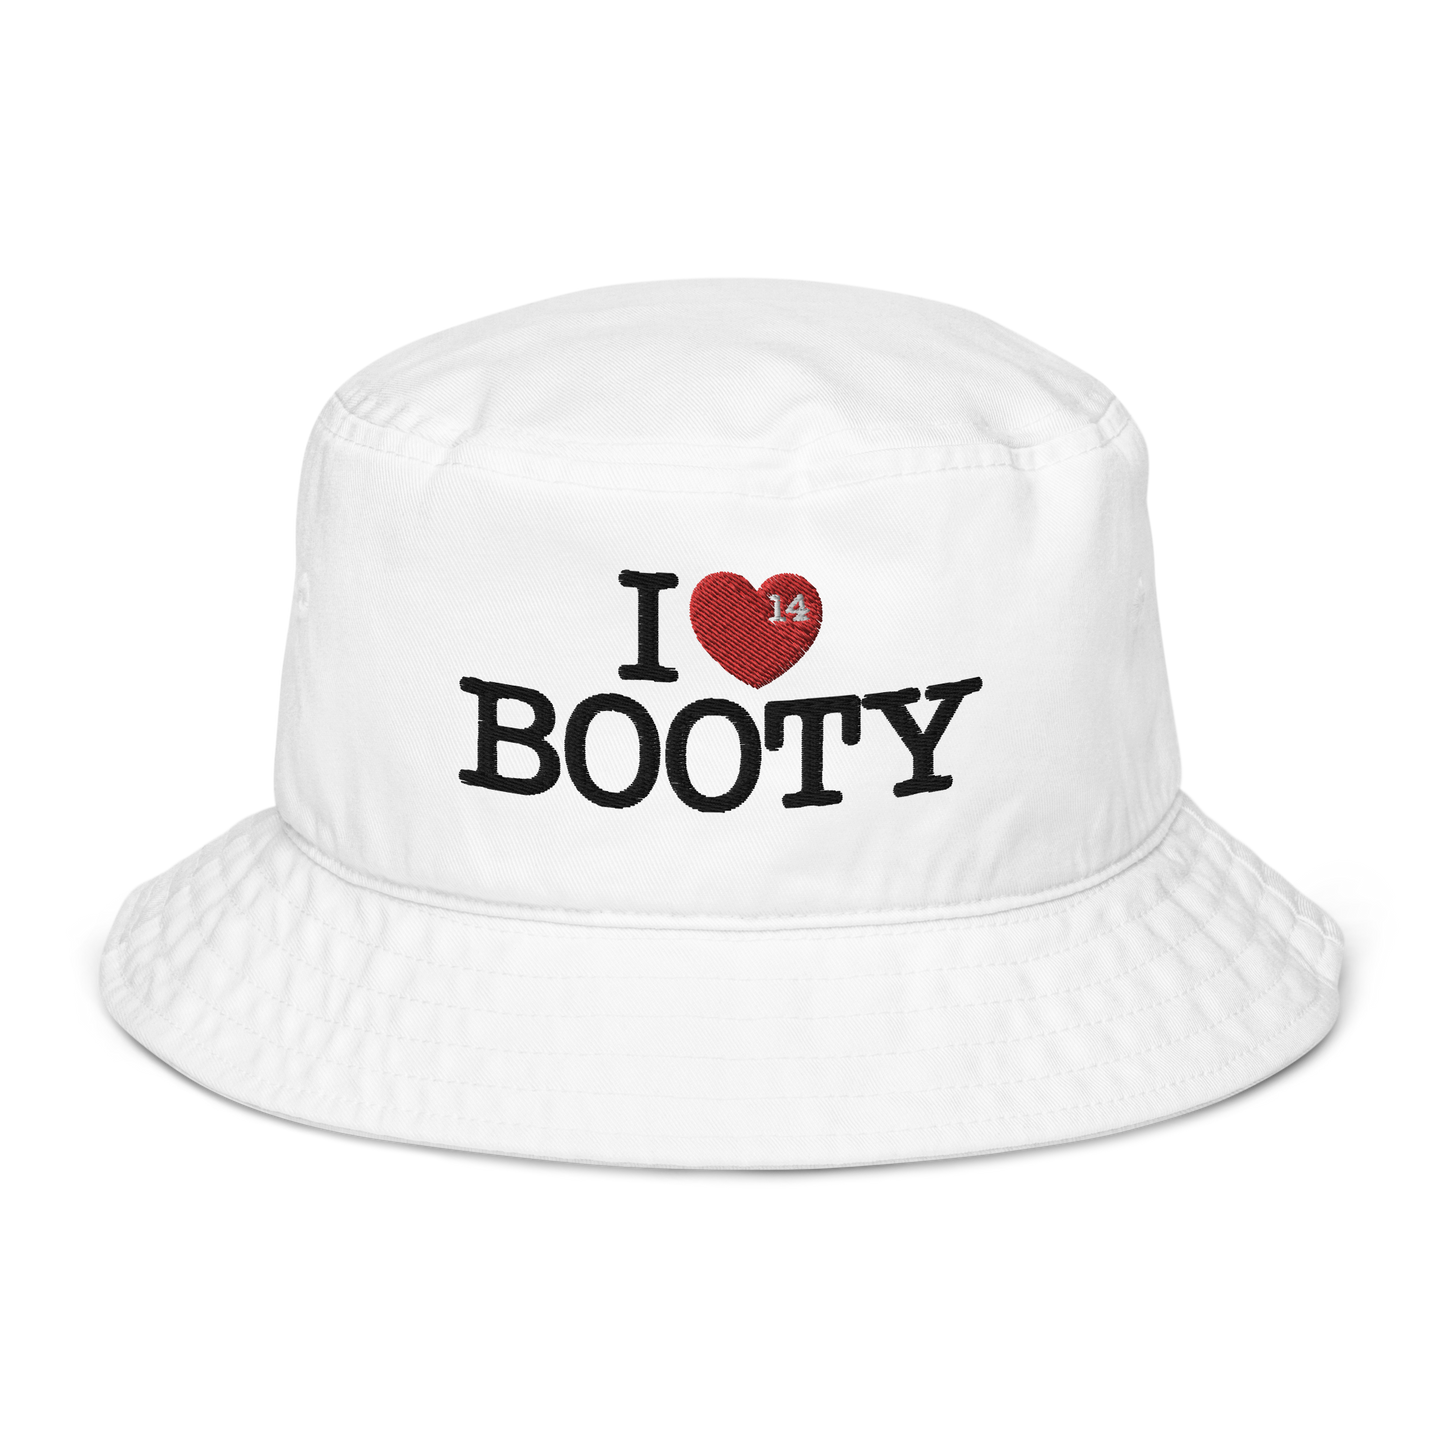 I LOVE BOOTY BUCKET - The General Booty Official Shop by More Than Just A Name | MTJN